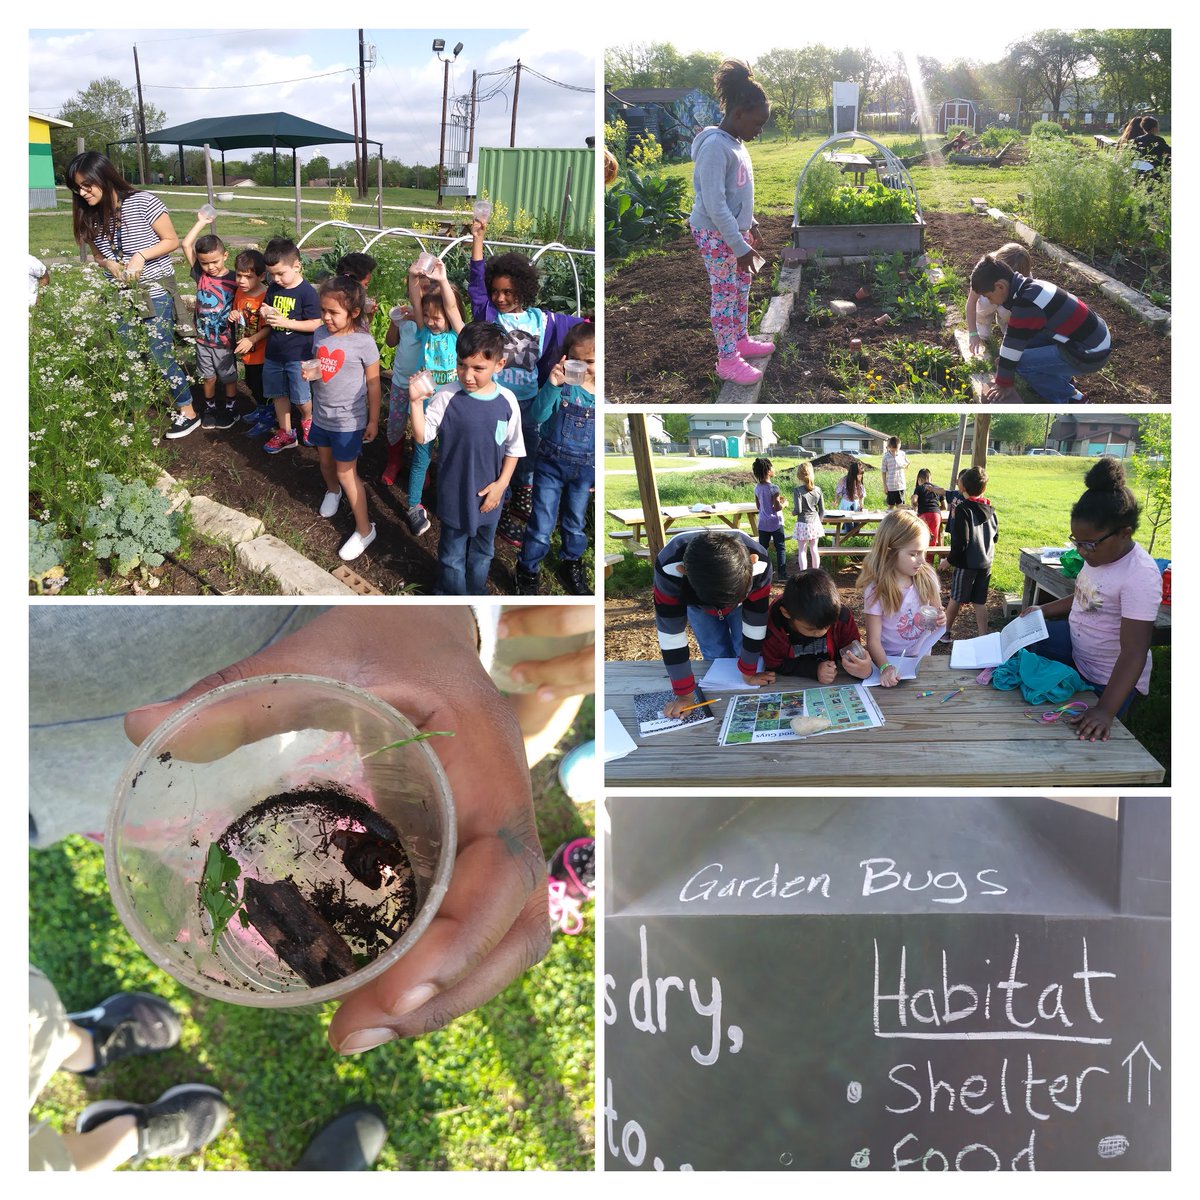 Habitats, life cycles, food webs, and animal adaptations are just a few of the topics we covered with our Garden Bugs lesson! @peas_community @Cobras_PTA @Cobra_Principal @CunninghamCobra @AISD_Science @AustinISDGreen #aisdoutside